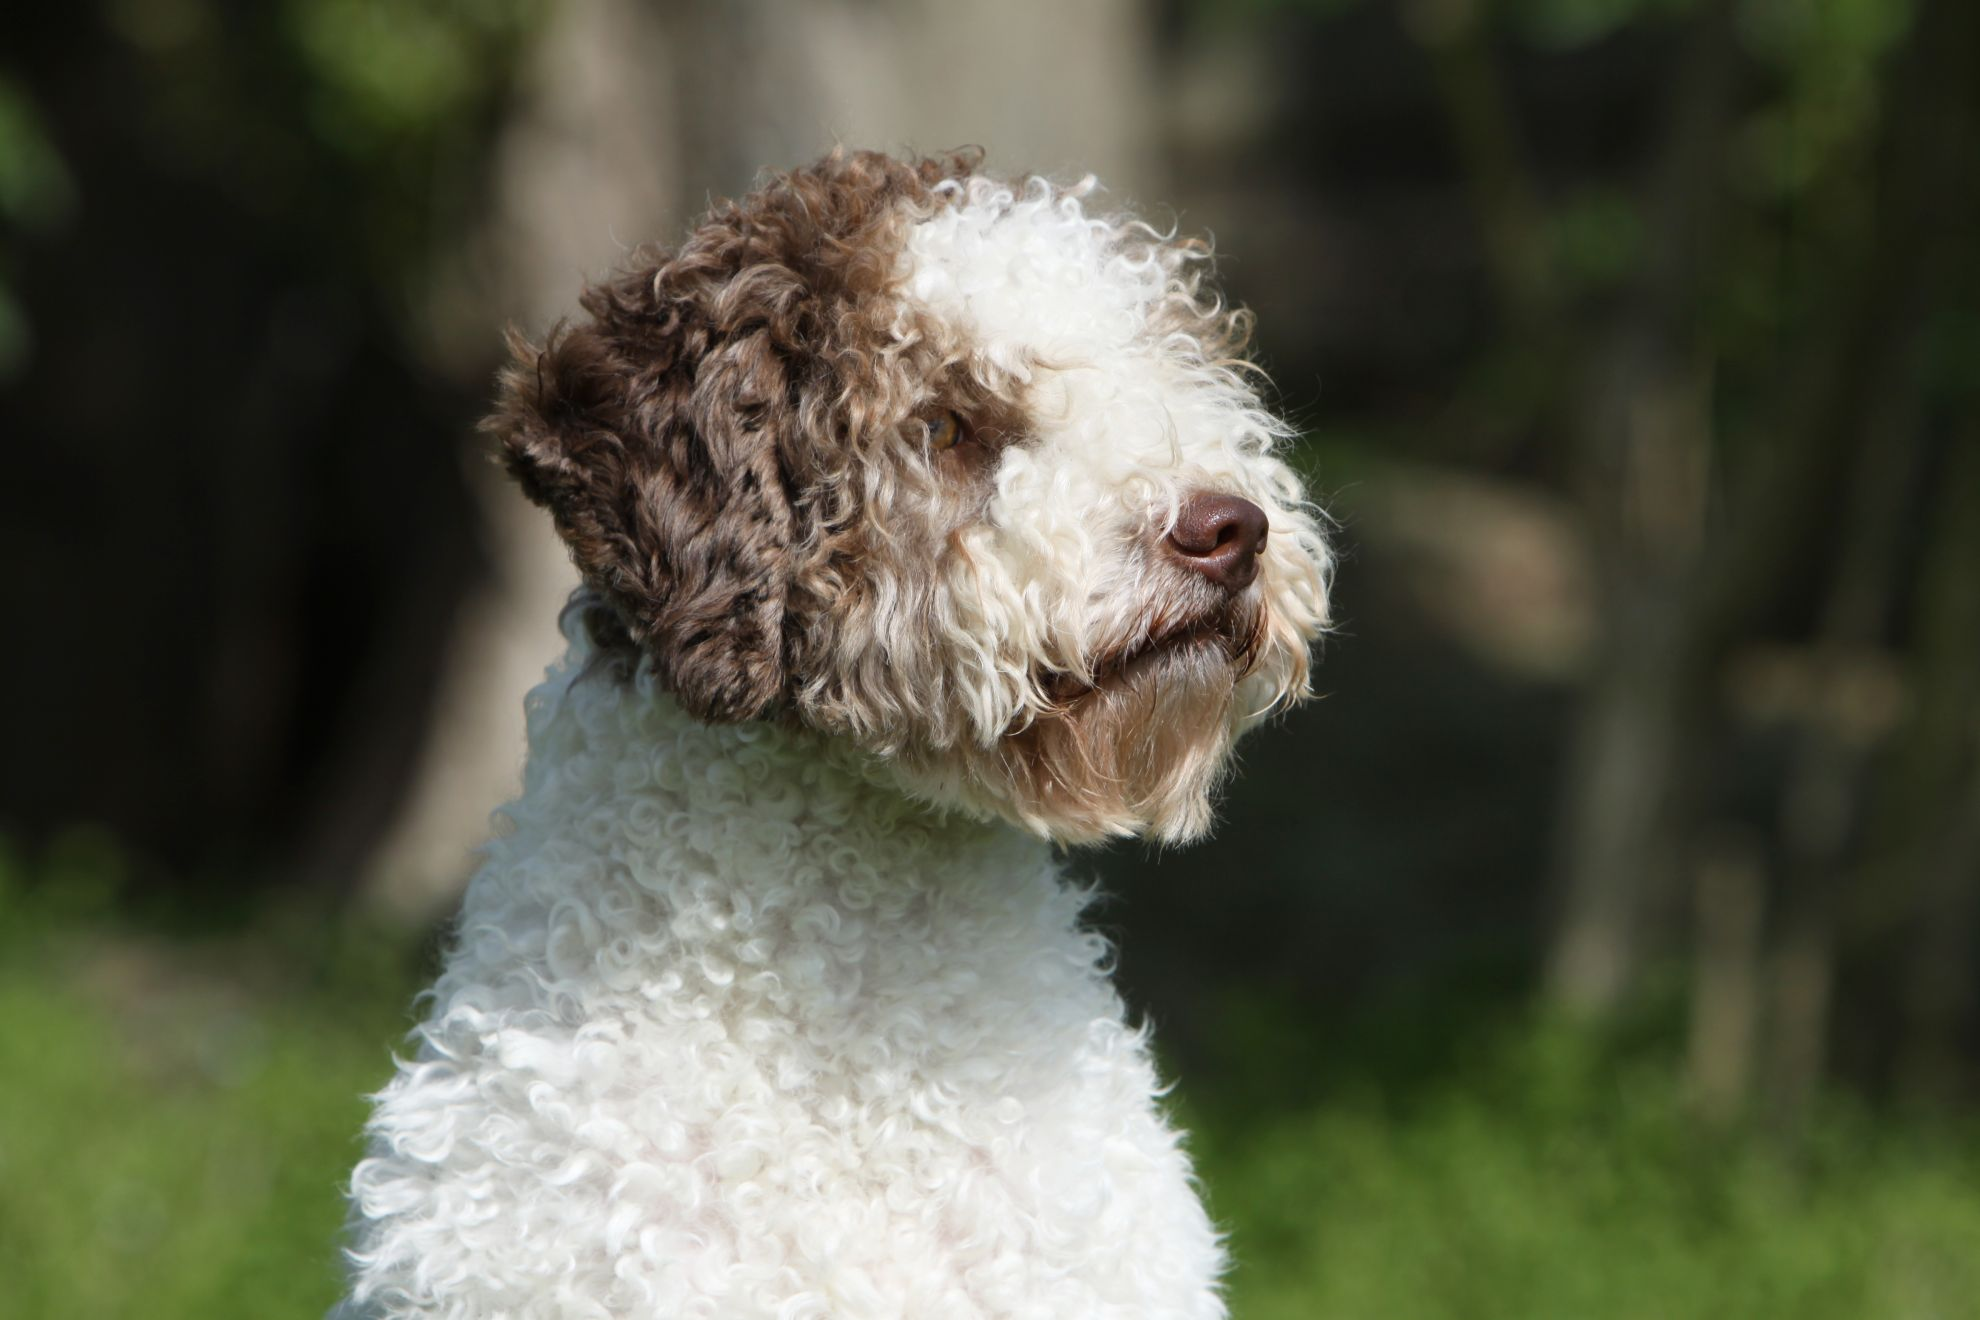 Brown and white Lagotto Romagnolo turned away from camera